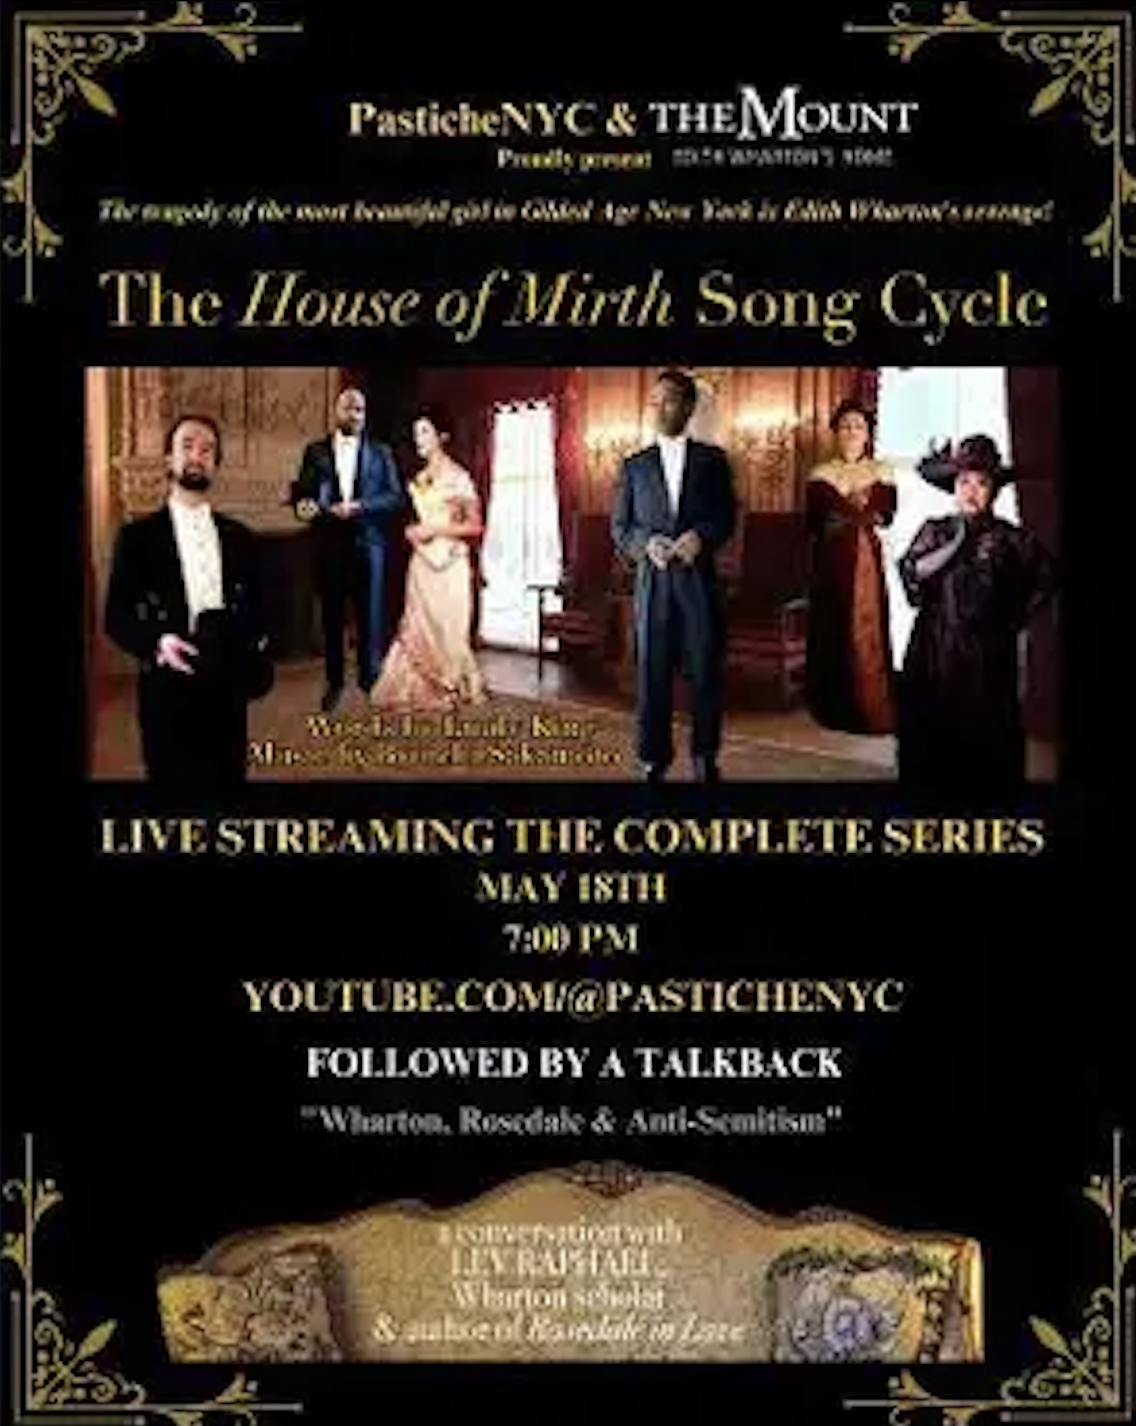 THE HOUSE OF MIRTH SONG CYCLE, Online Event